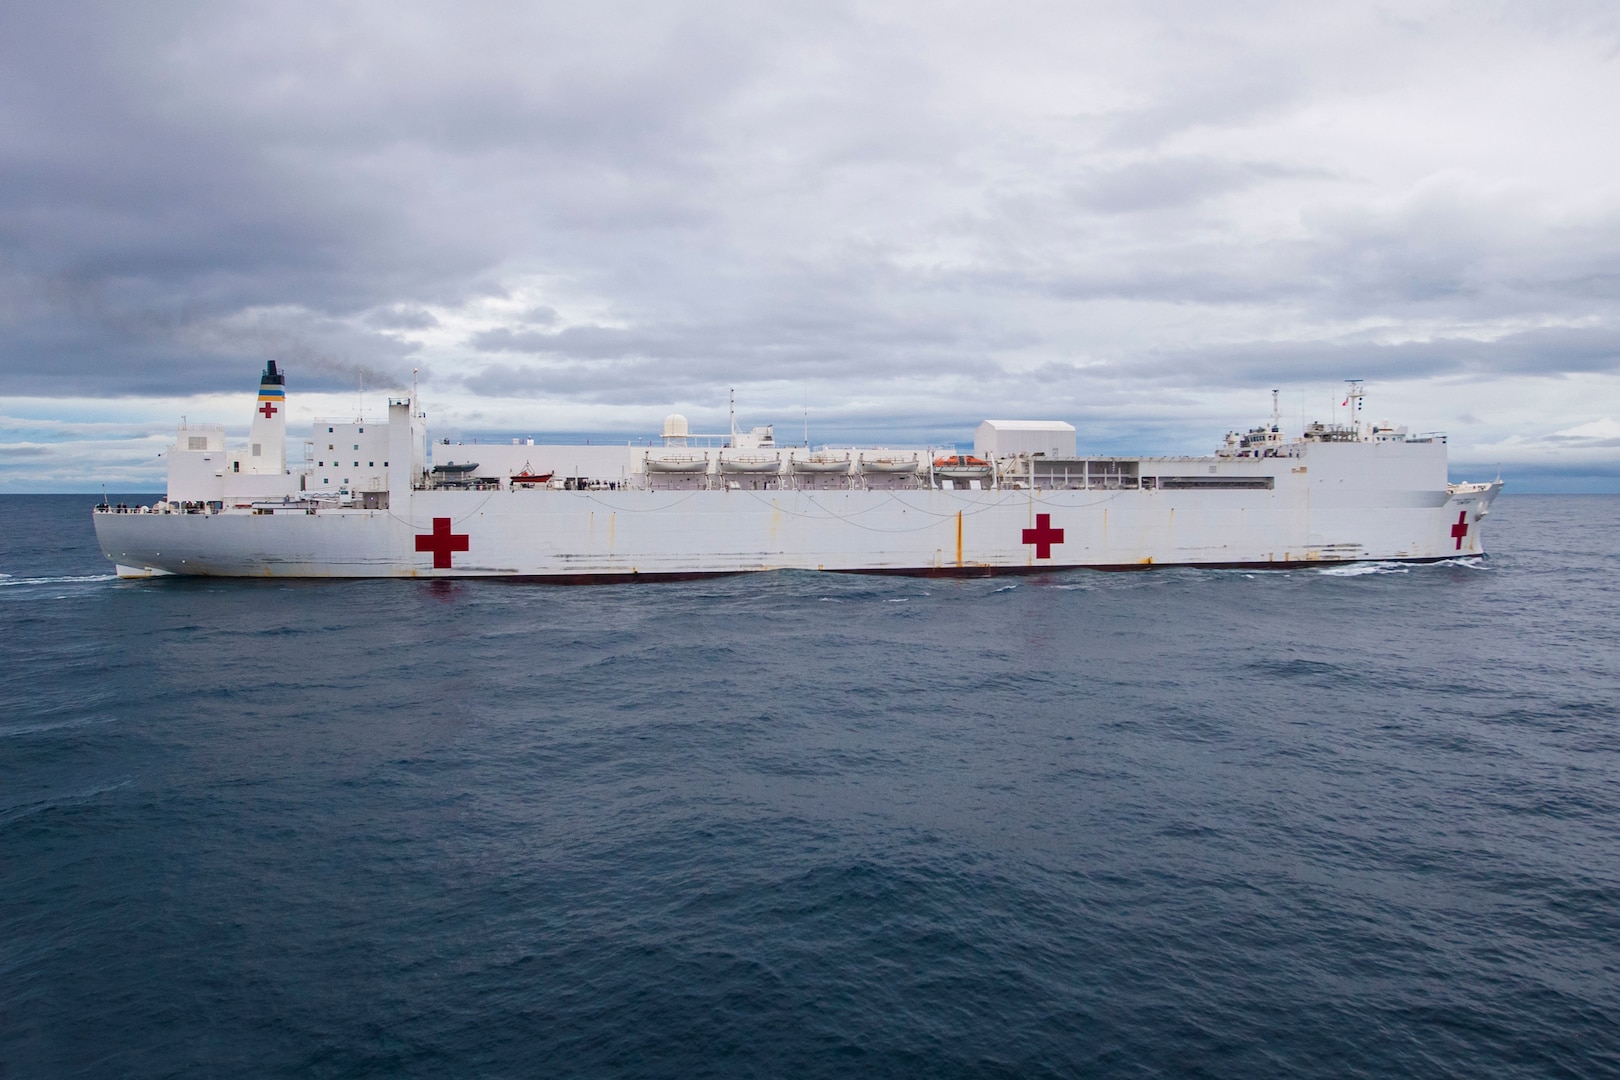 The hospital ship USNS Comfort (T-AH 20) transits the Pacific Ocean.